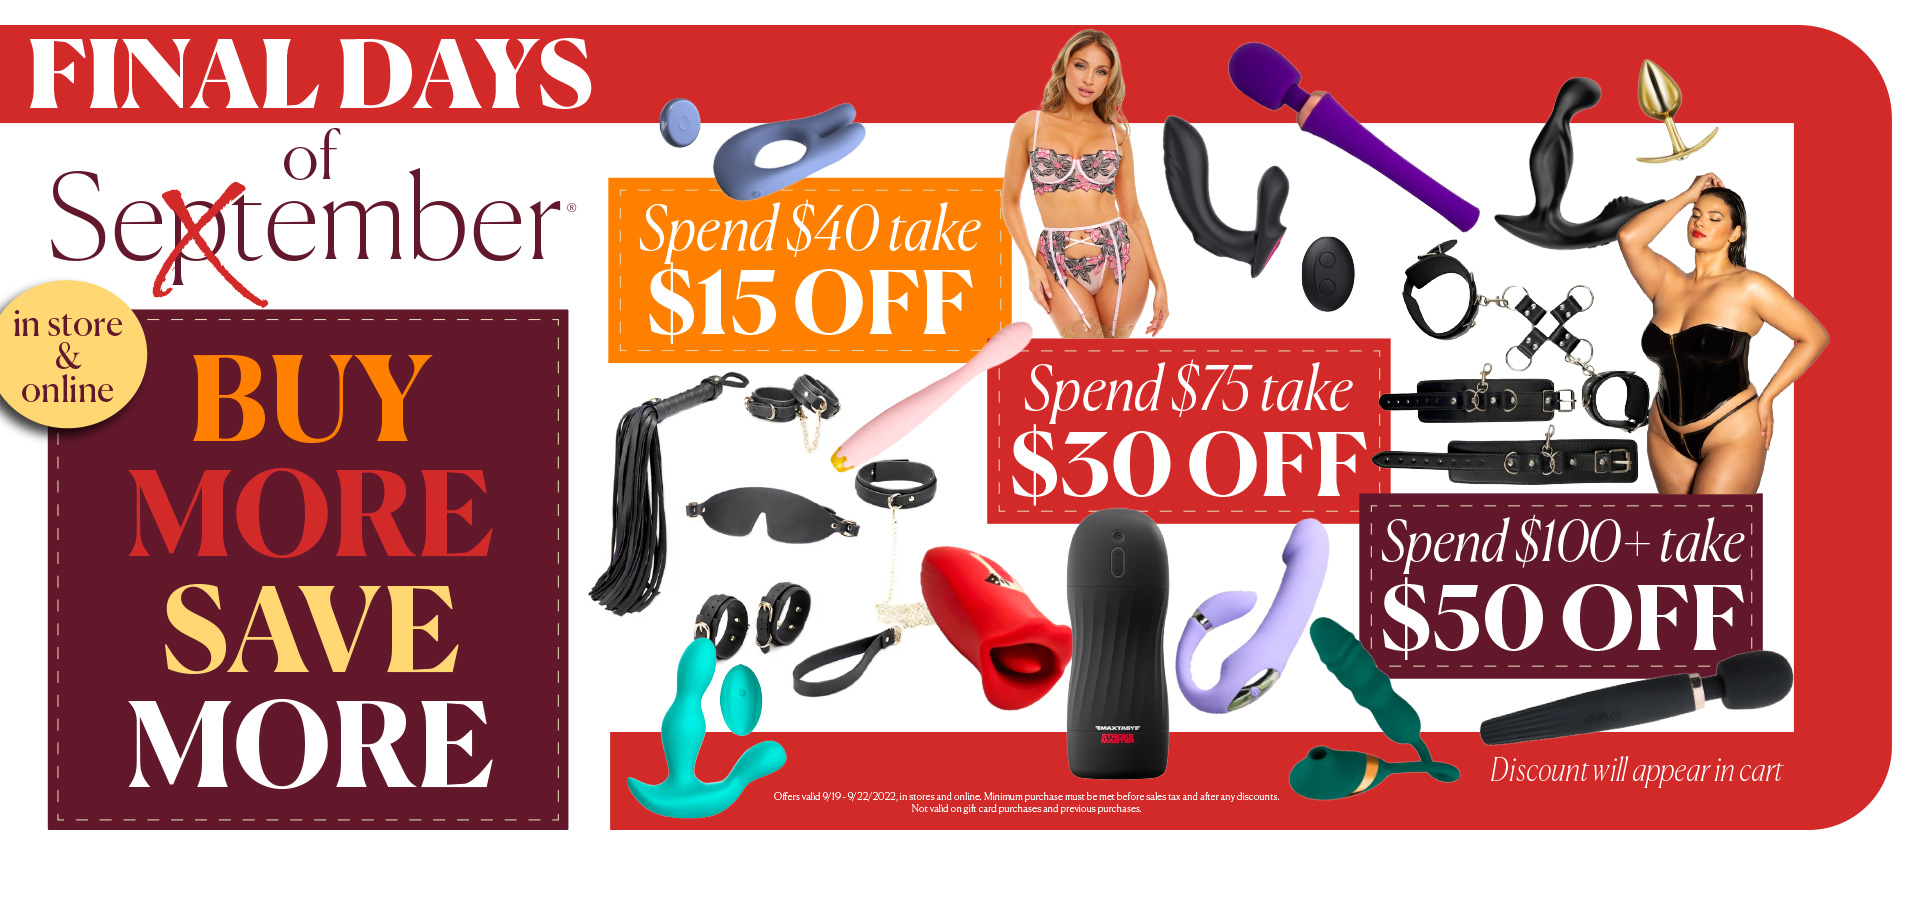 FINAL DAYS of Sextember! Spend more get more!